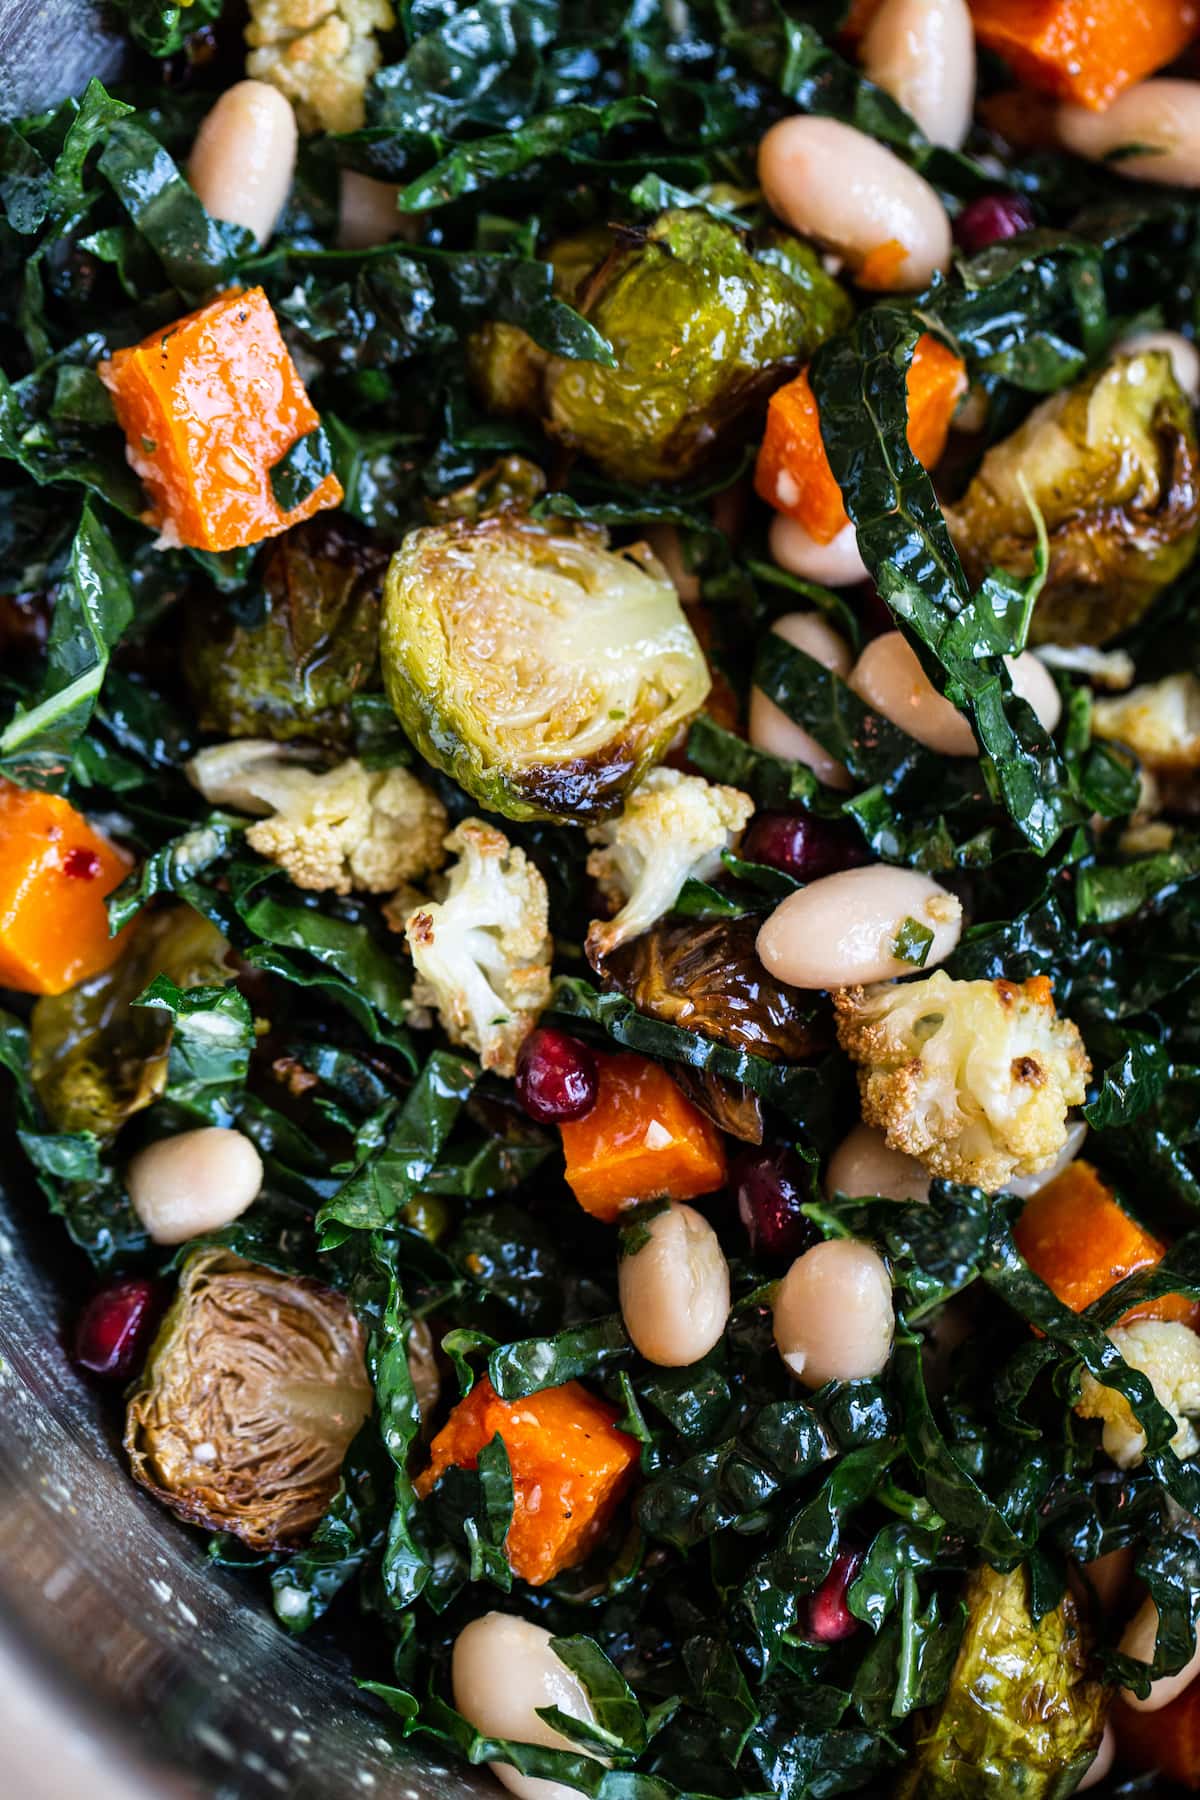 Kale salad with roasted vegetables and beans.